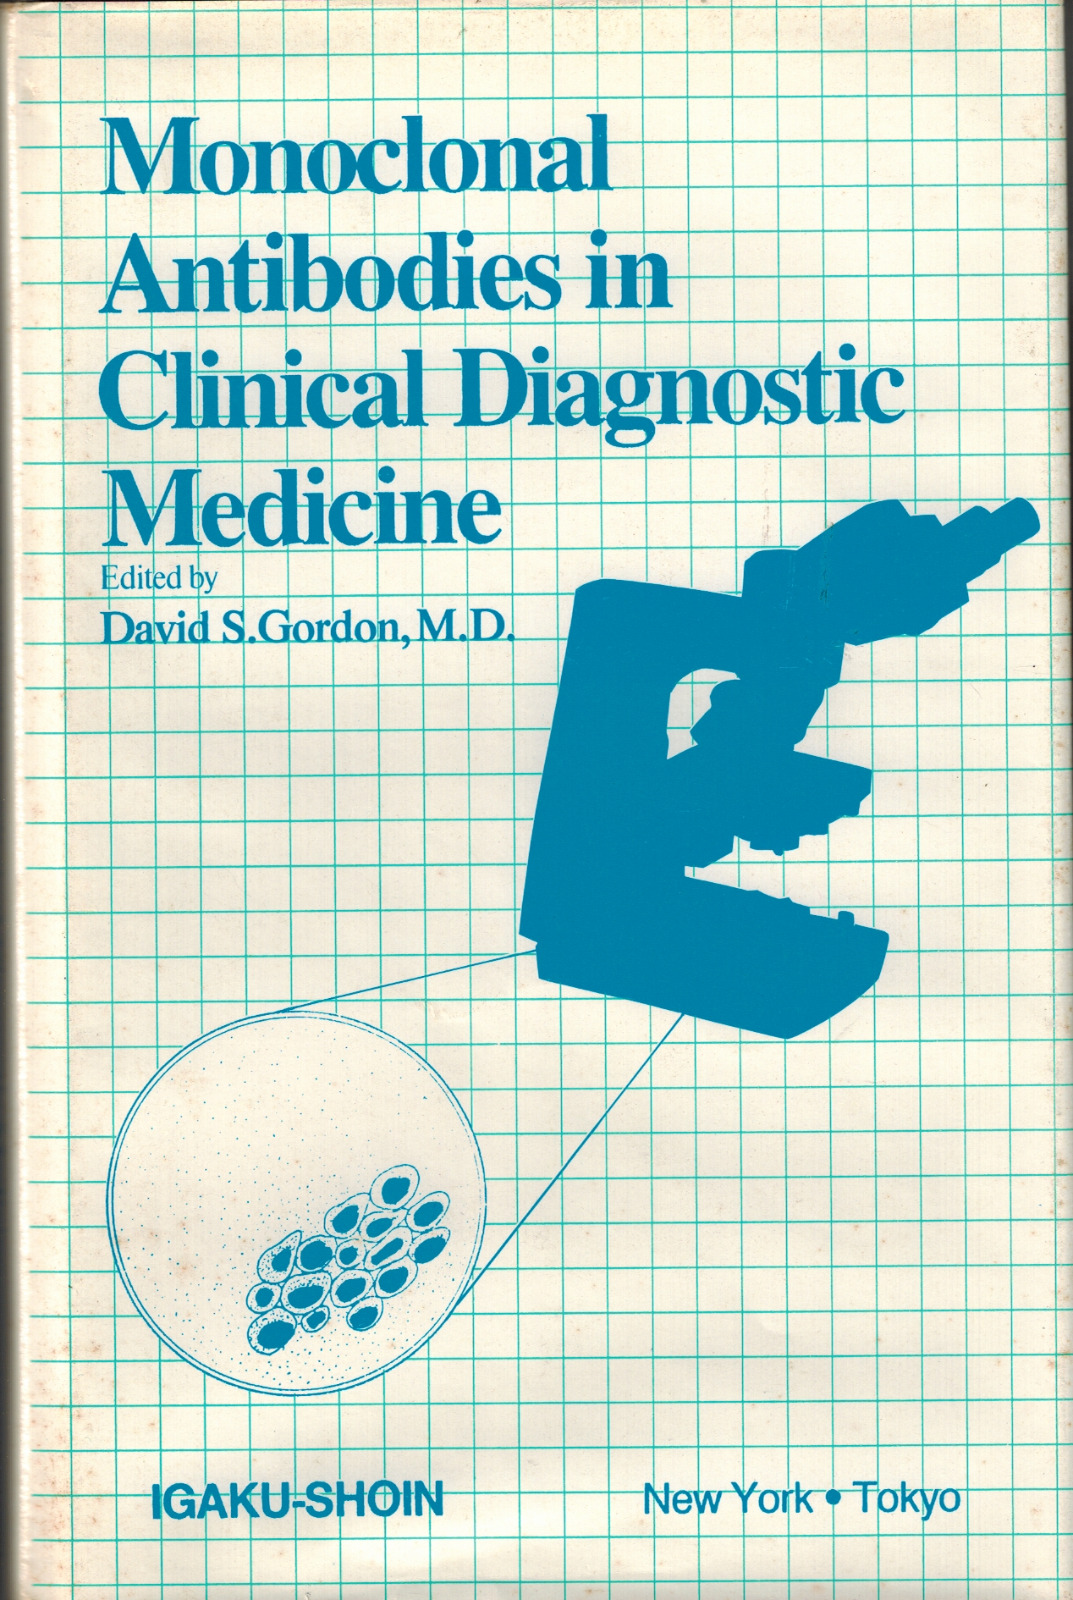 1985 1st Edition Monoclonal Antibodies in Clinical Diagnostic Medicine by Gordon